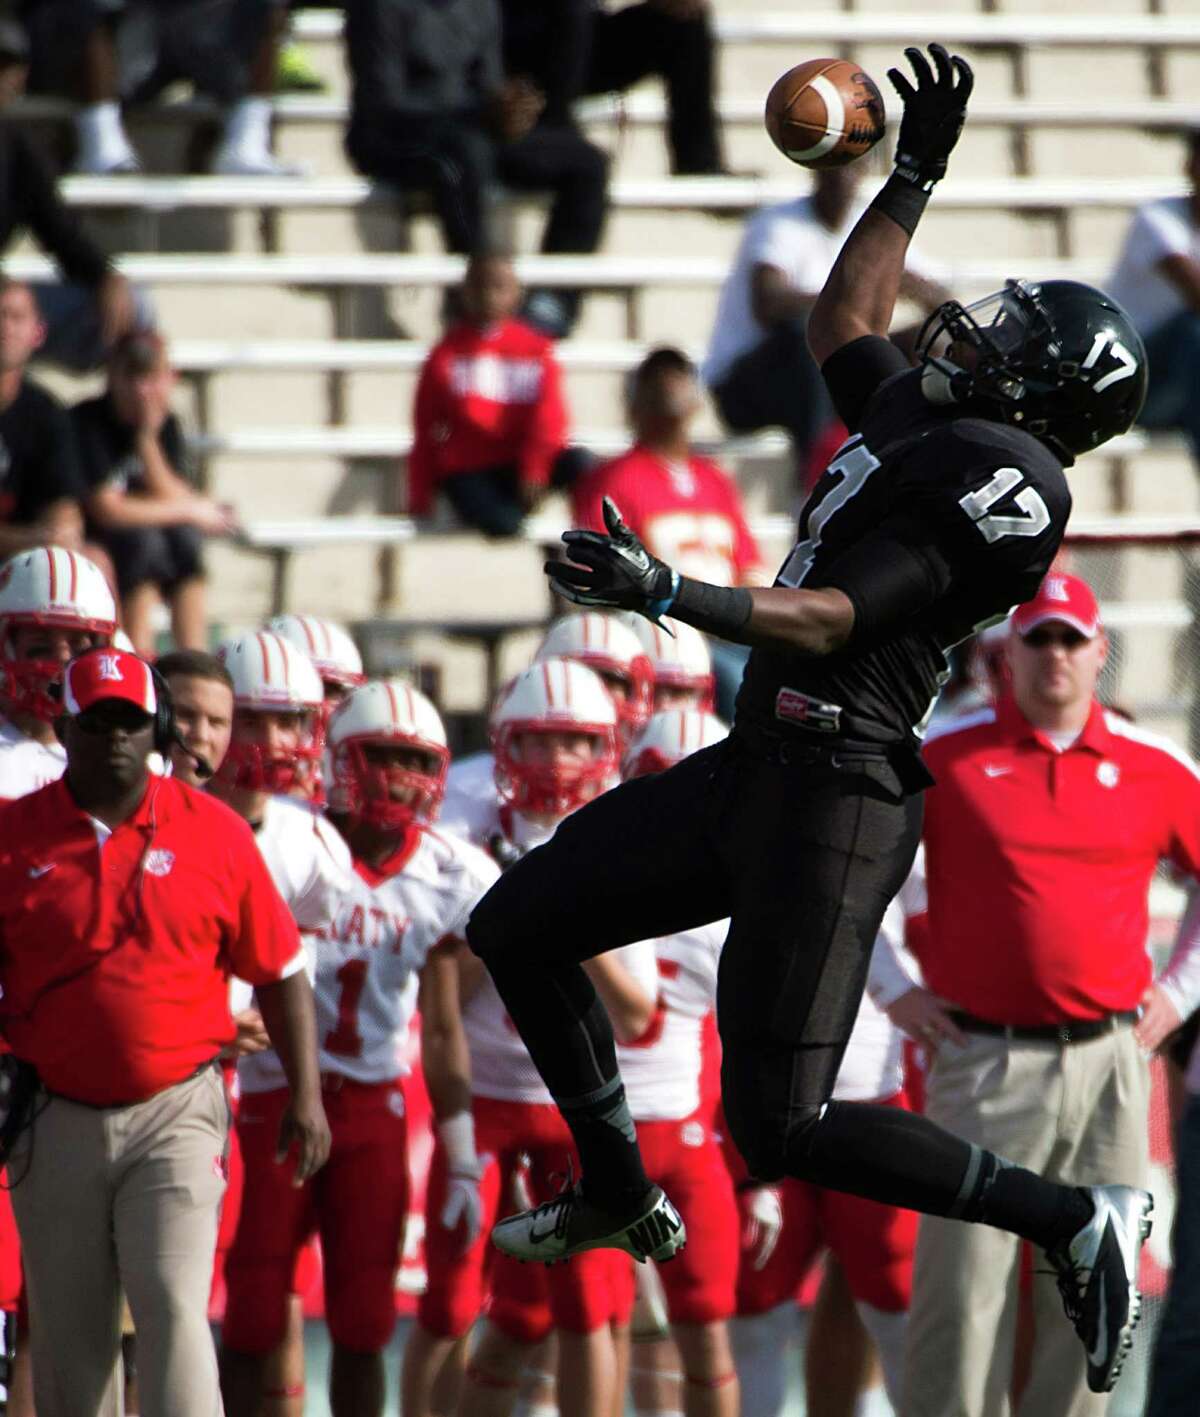 Cibolo Steele wide receiver Thaddeous Thompson (17) tries to make a one-handed catch against Katy during the first quarter in a Class 5A Division II state high school football semifinal game at Floyd Casey Stadium on Saturday, Dec. 15, 2012, in Waco. ( Smiley N. Pool / Houston Chronicle )